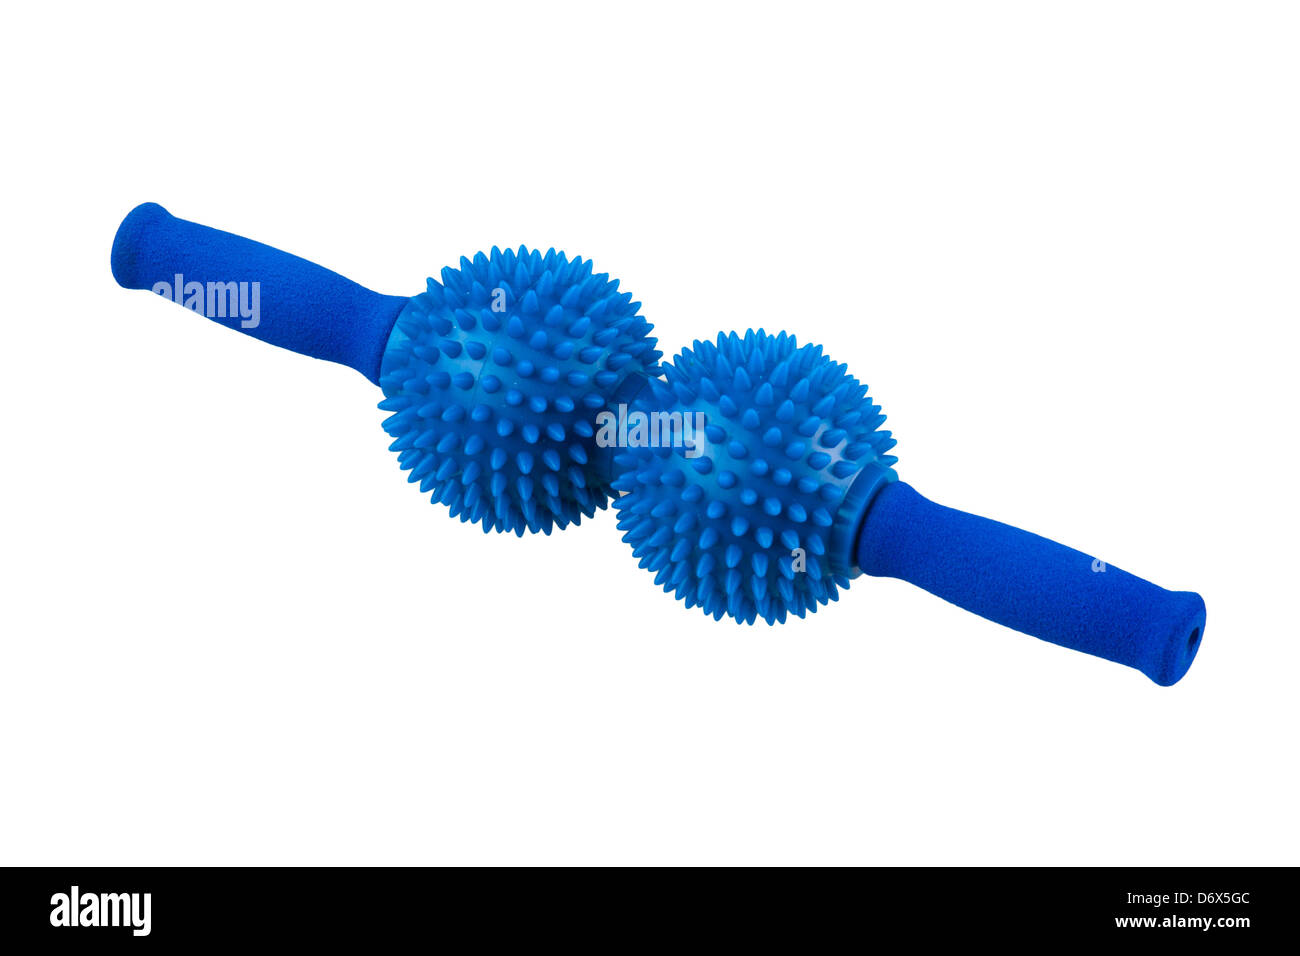 Rubber muscle massage tool for your muscle relaxation after exercise Stock Photo